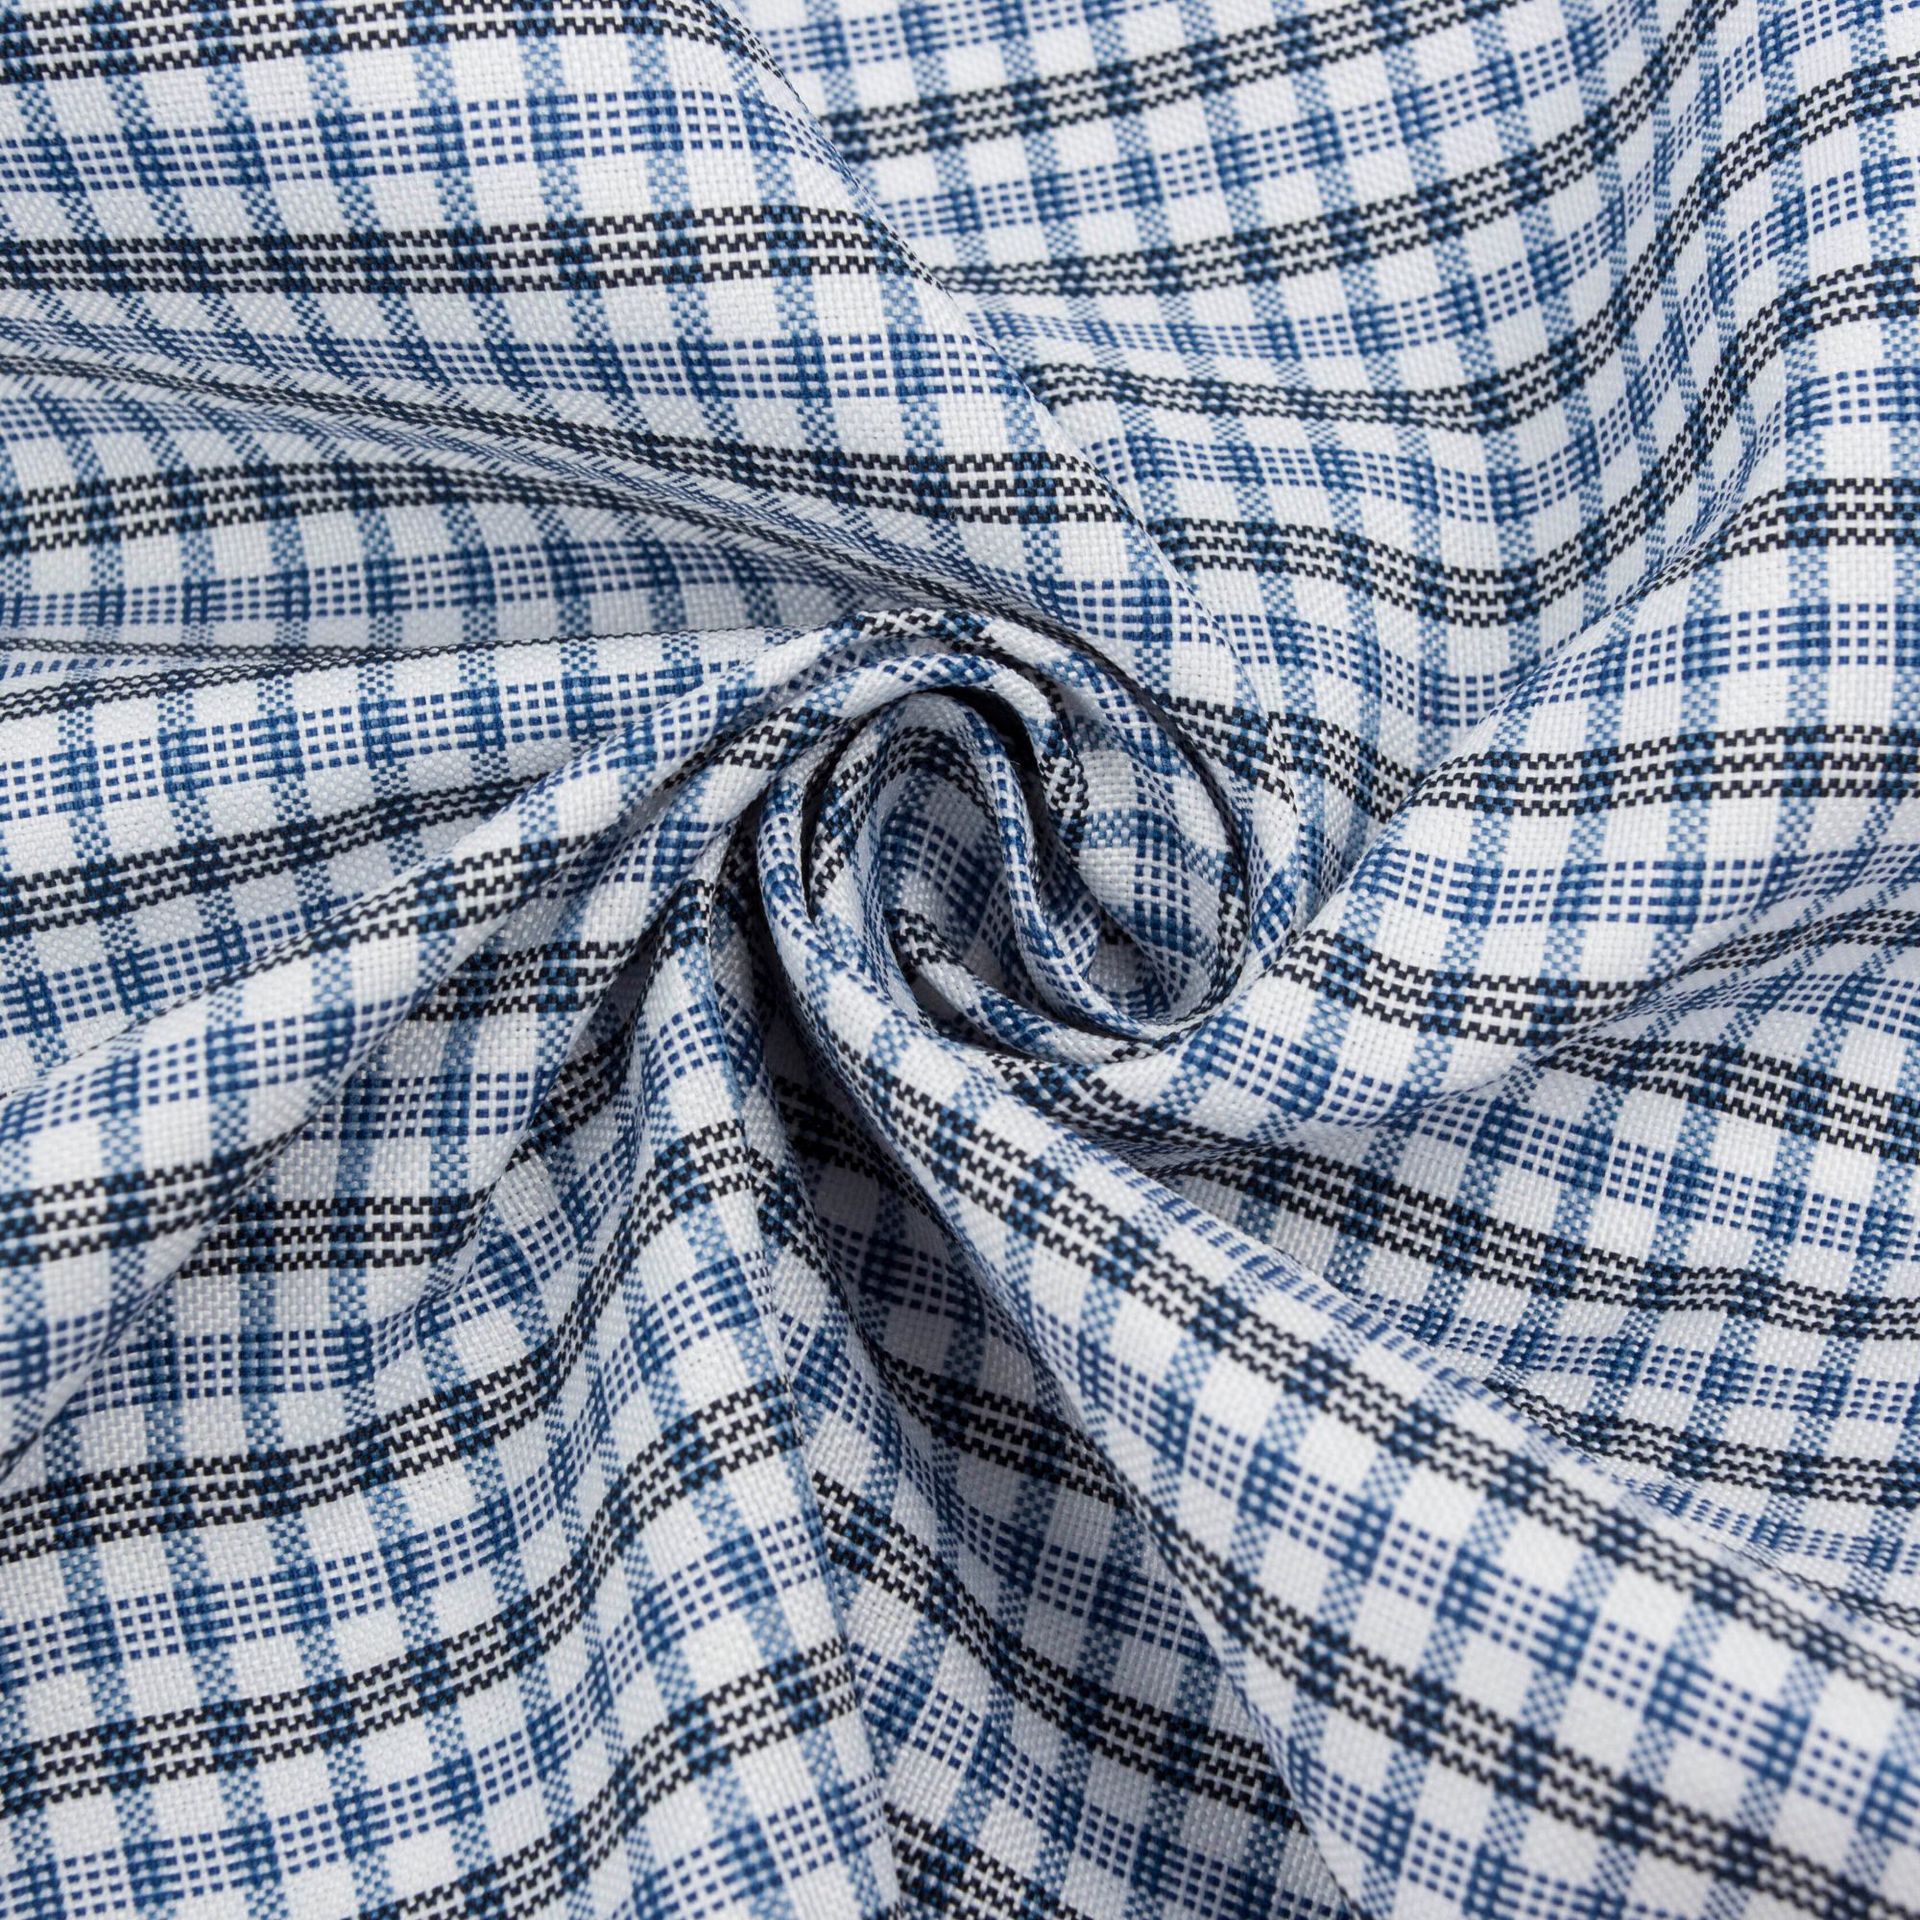 Yarn-Dyed Shirt's Fabric Plaid Clothing Fabric Can Be Sample Production and Processing Price Can Be Discussed